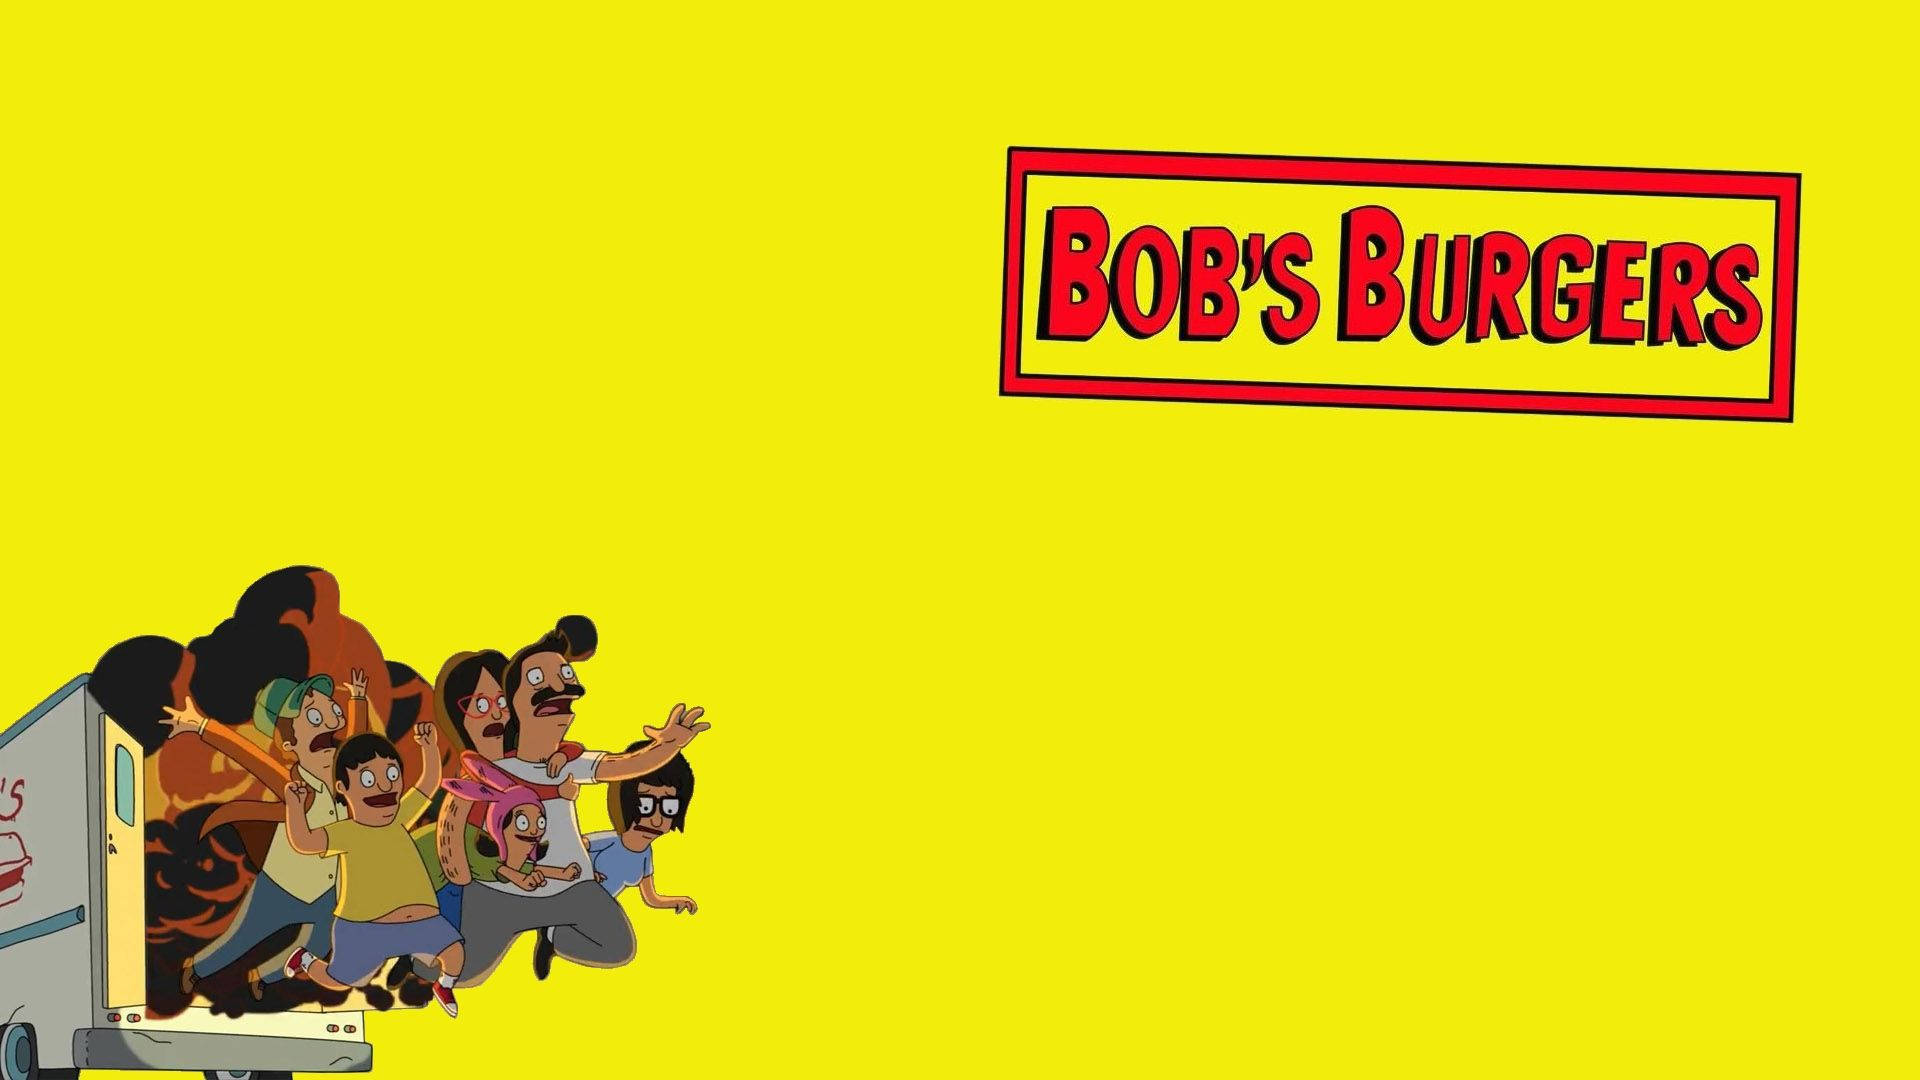 Bobs Burgers Food Truck On Fire